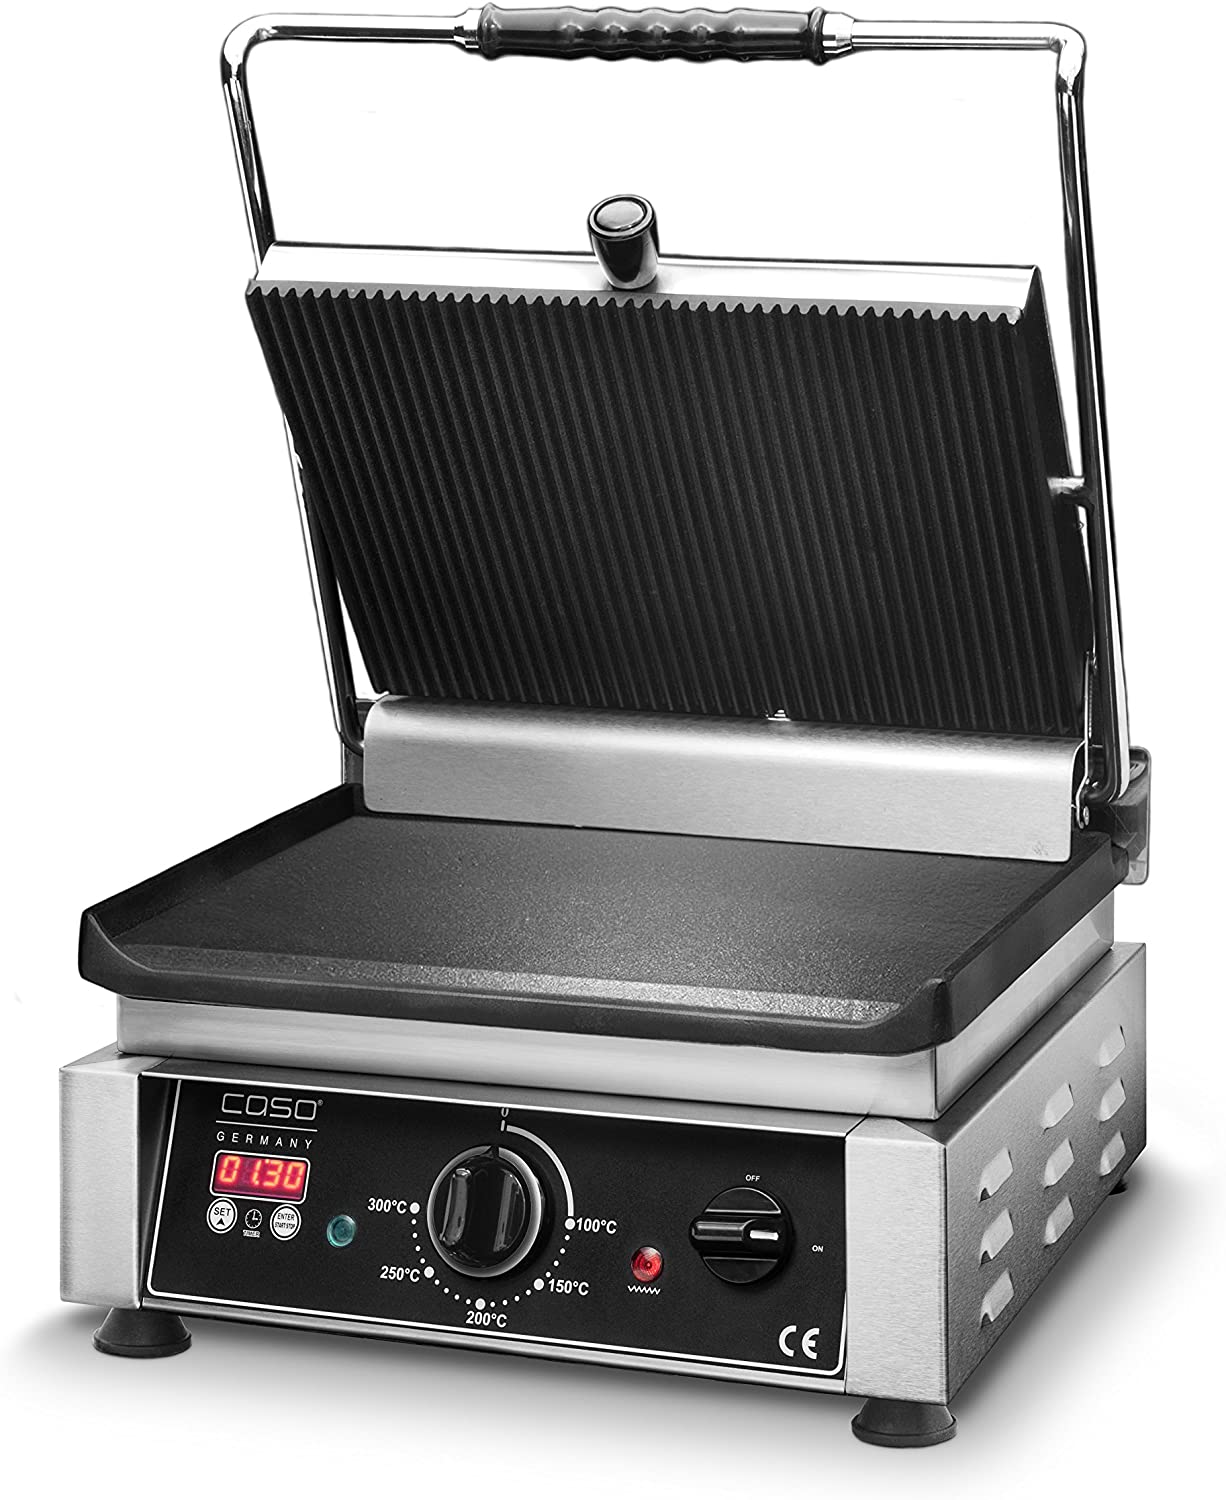 Caso Professional Gourmet Grill - Double Contact Grill with 2500 Watt Grooved / Smooth Cooking Surface